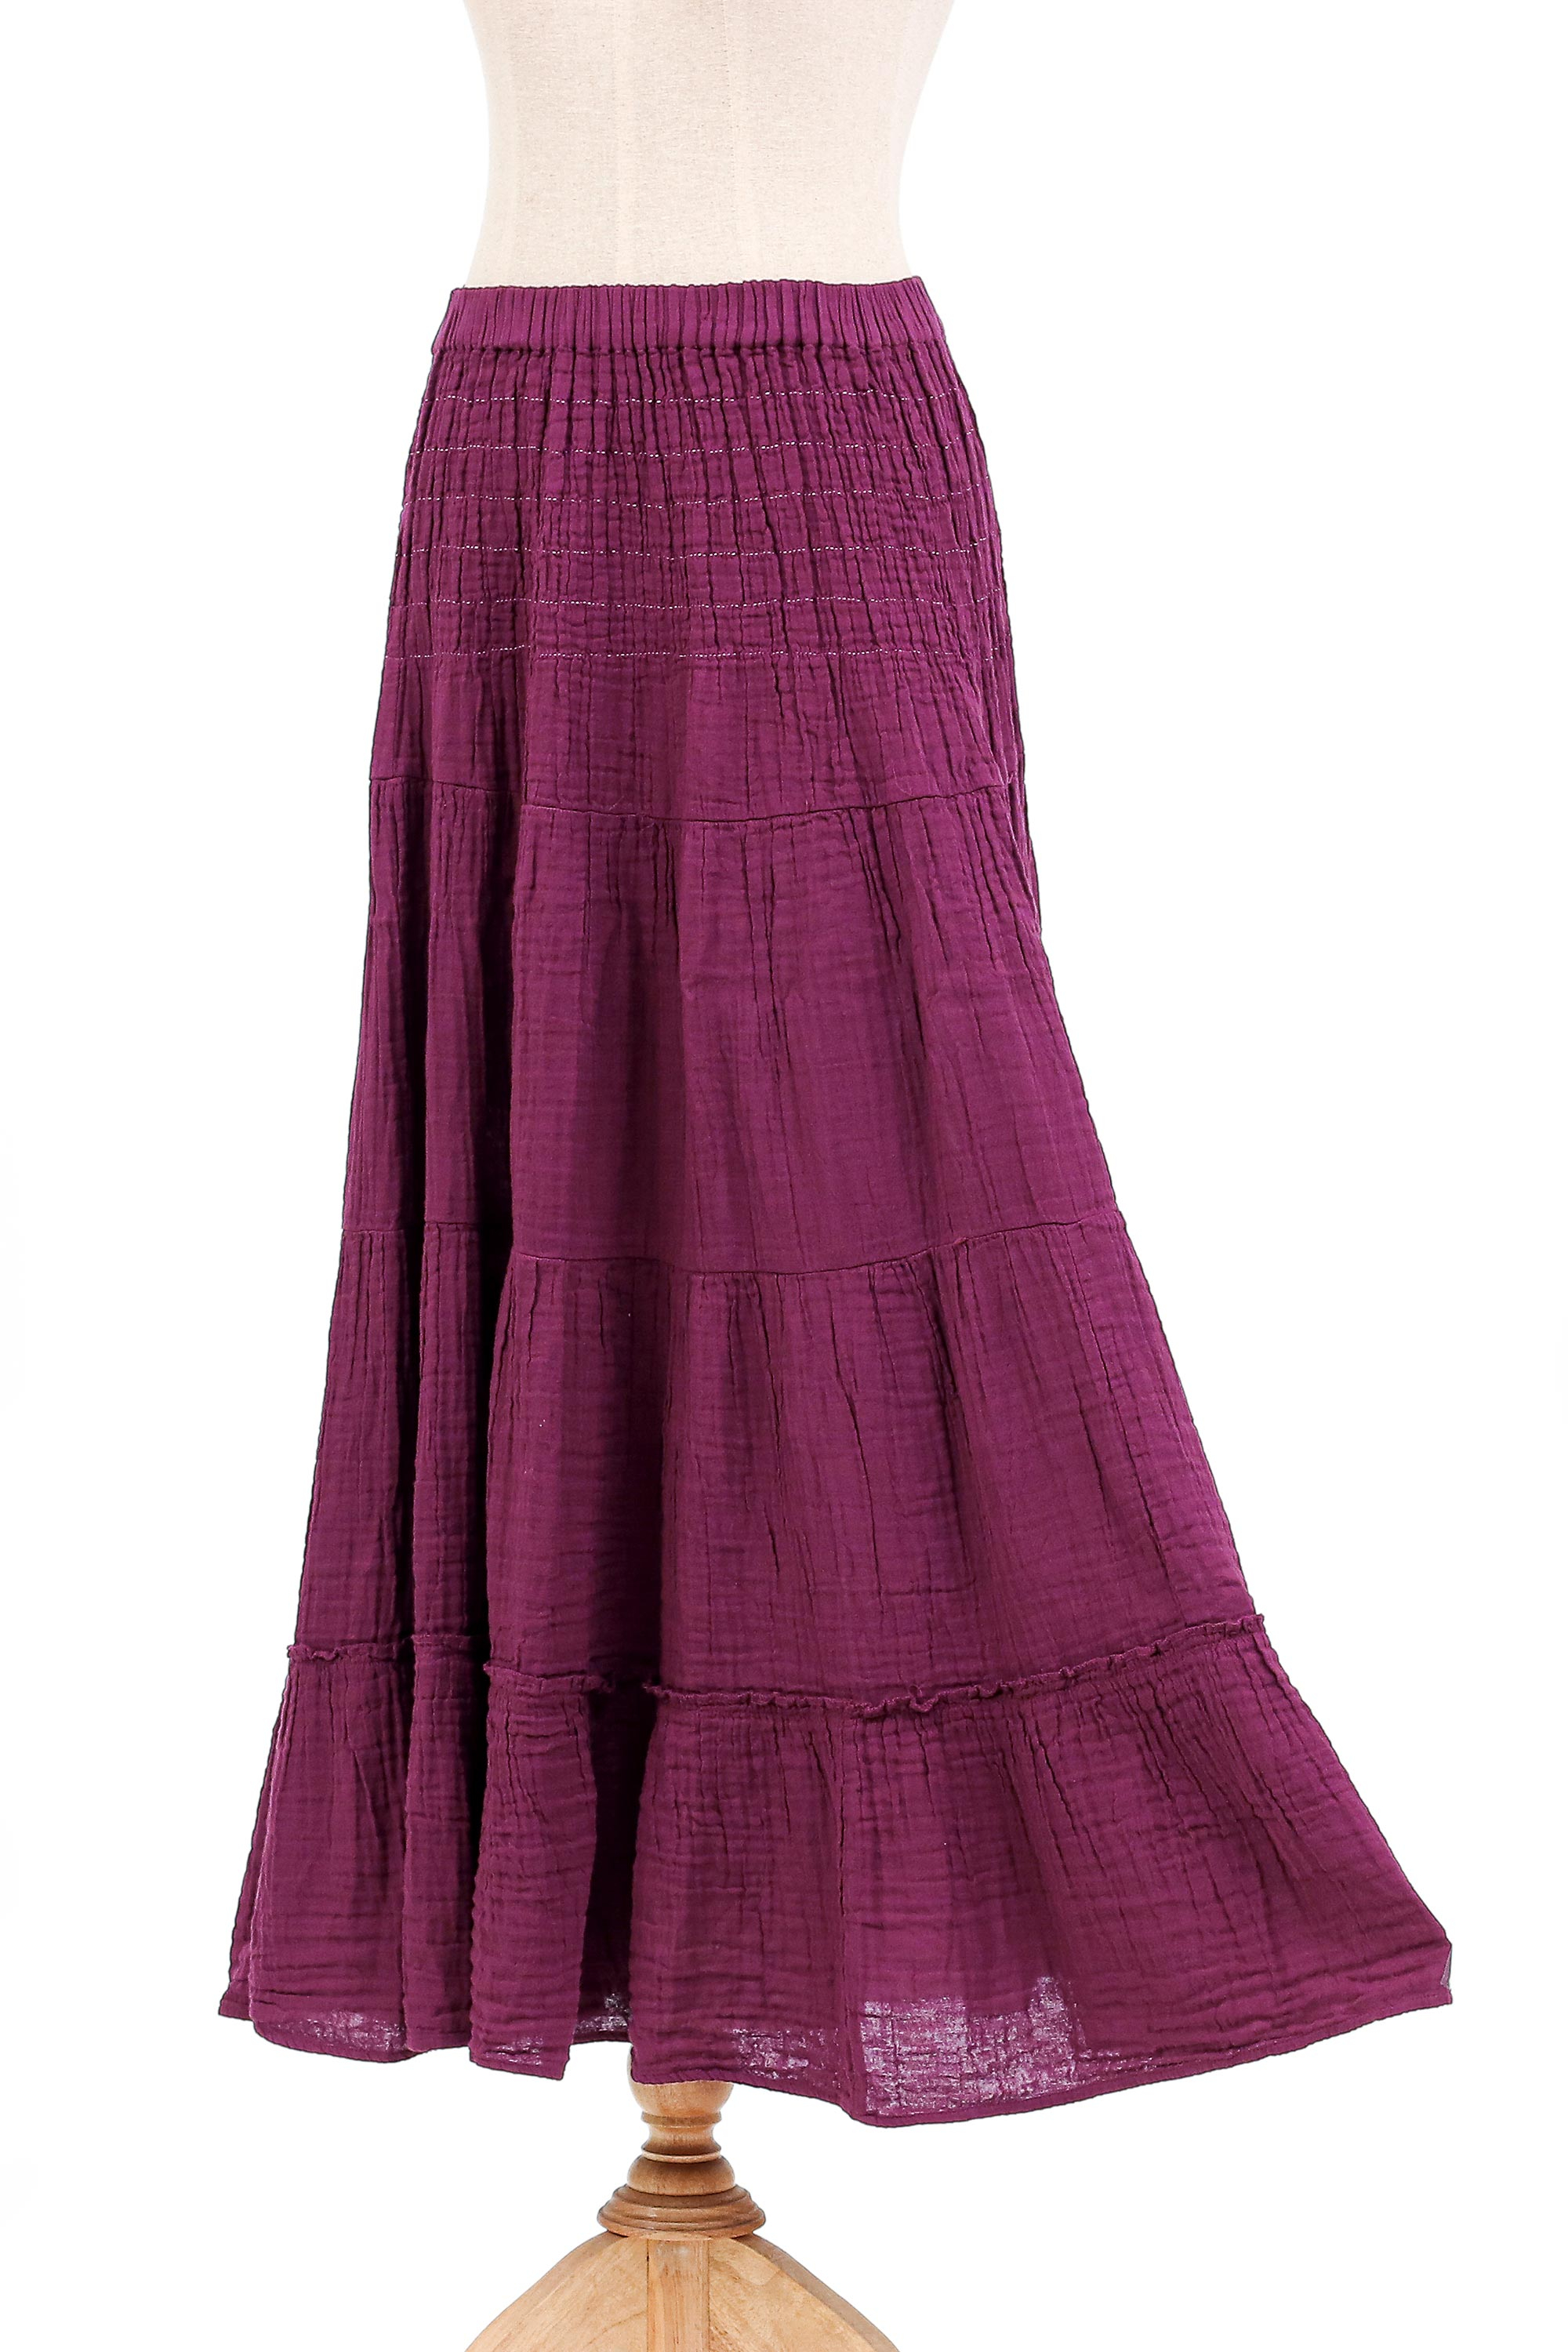 UNICEF Market | Thai Cotton Double Gauze Skirt - A Day Out in Mulberry